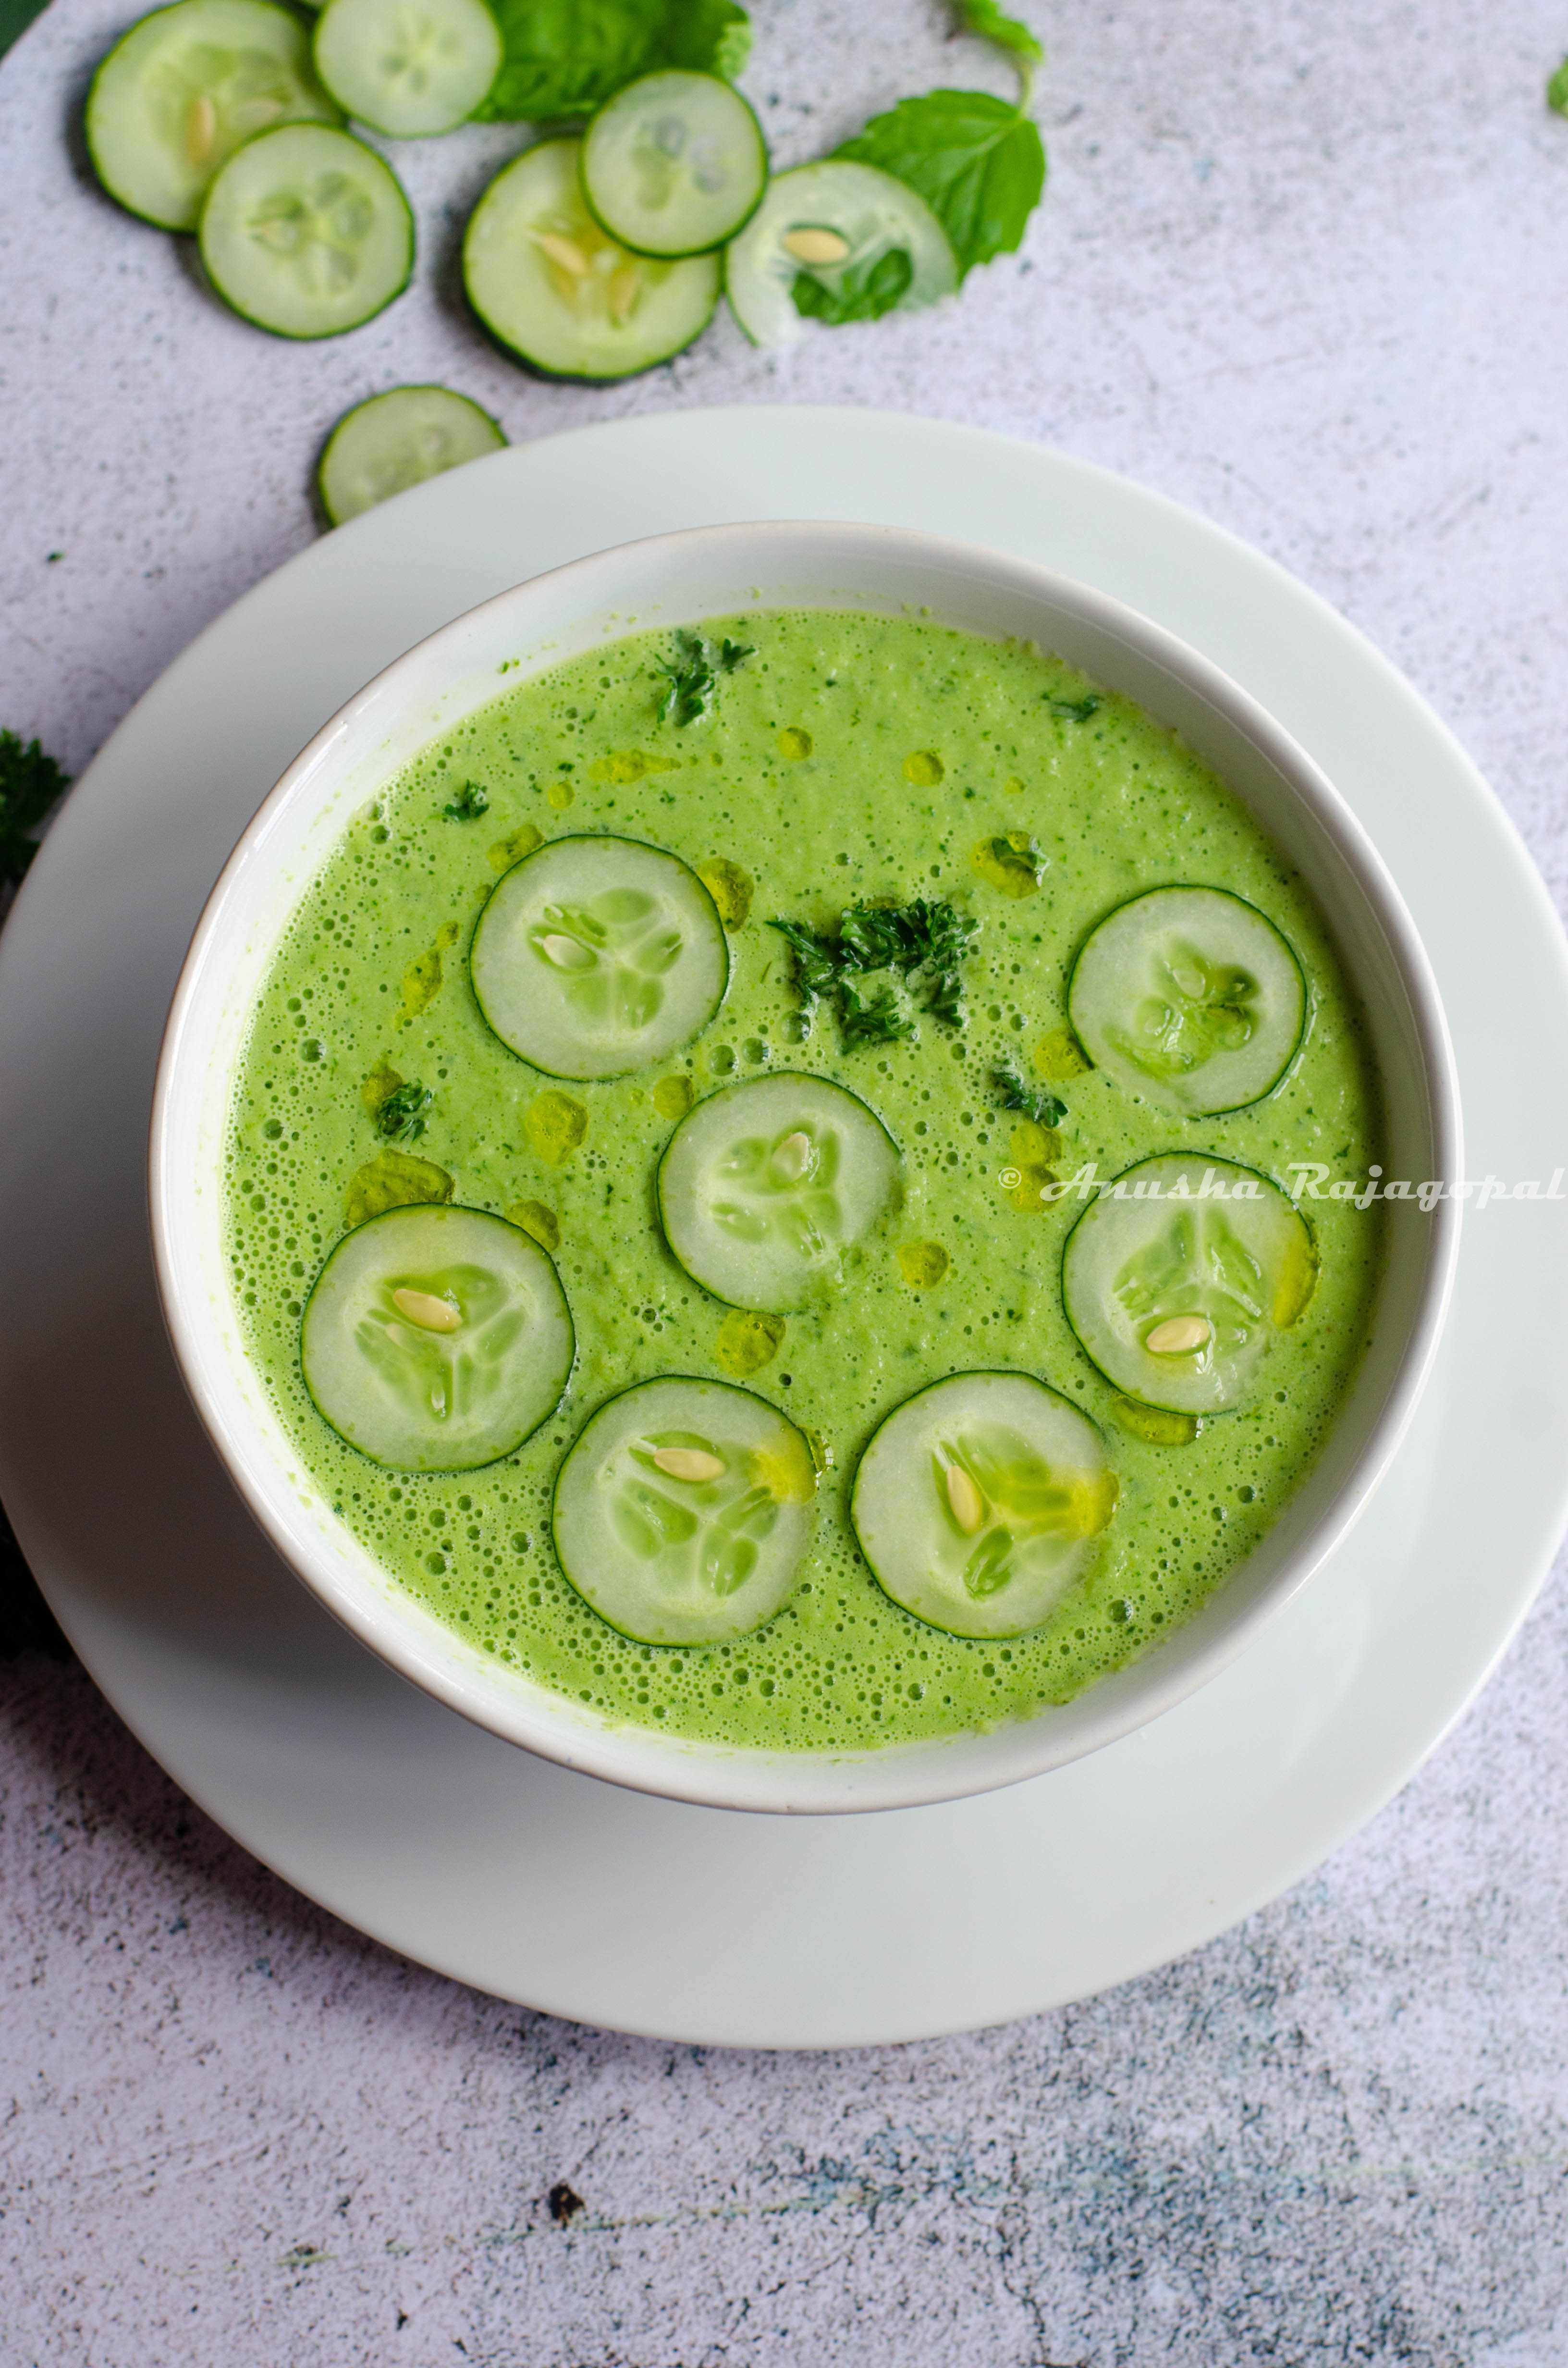 cucumber gazpacho topped with cucumber slices and herbs served in a white bowl set against a white background